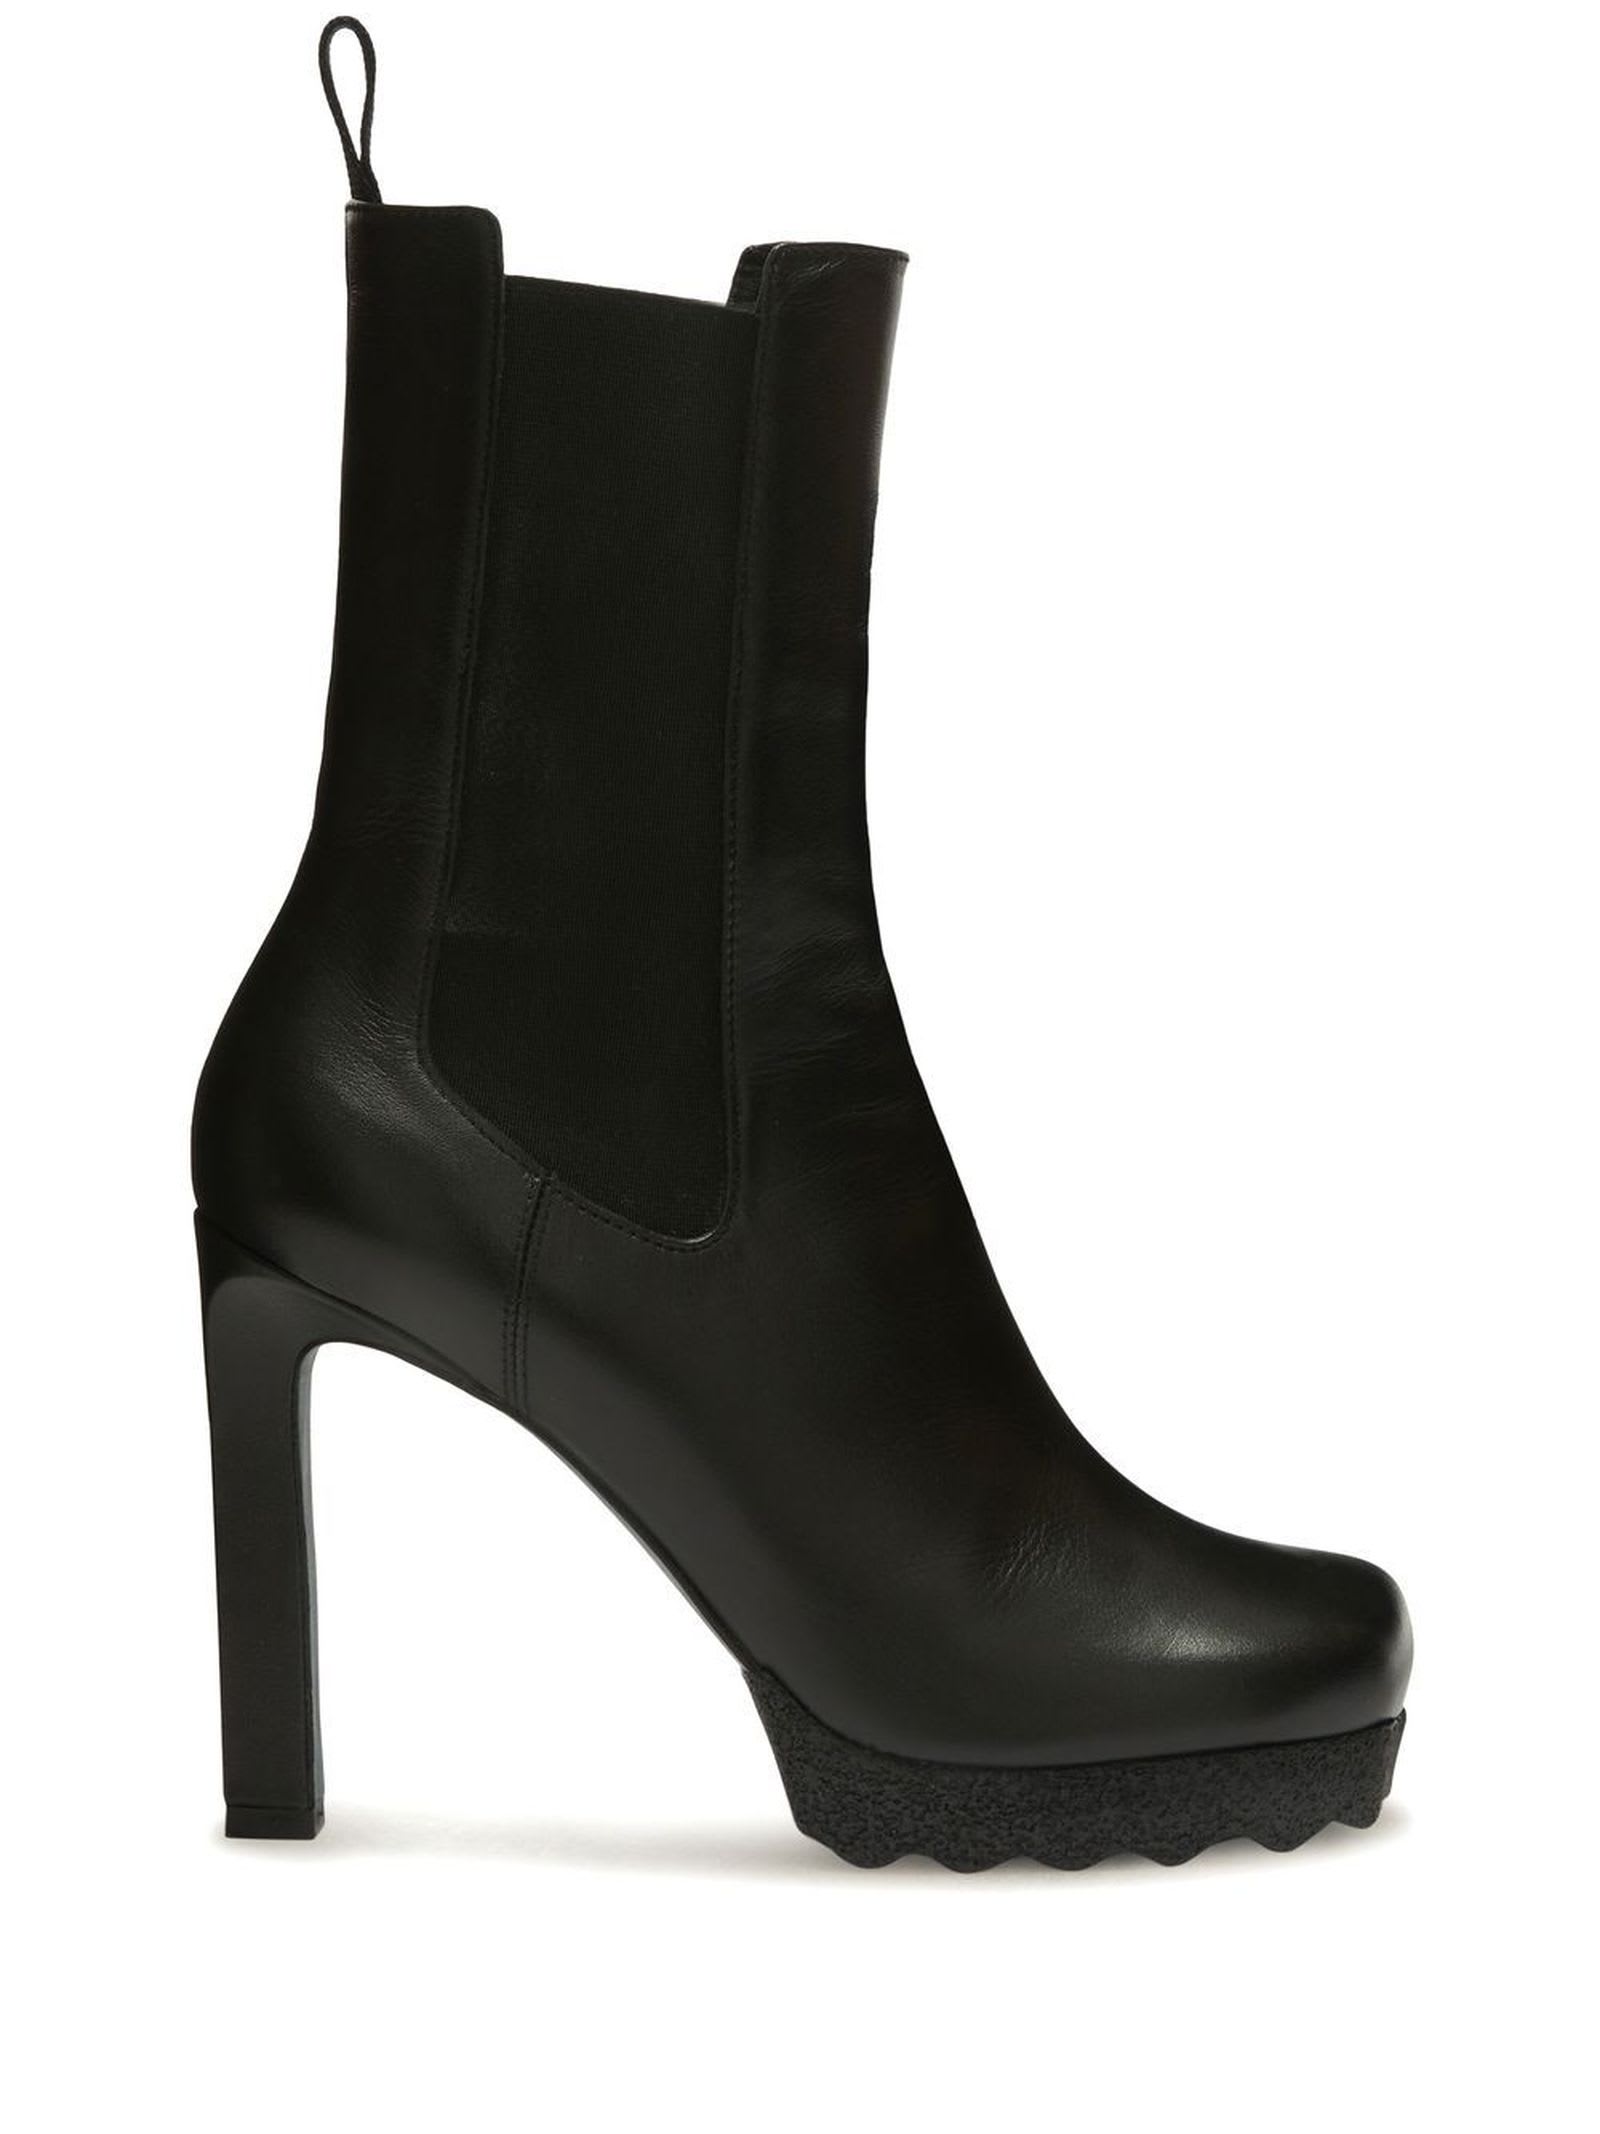 Off-White Black Calf Leather Ankle Boots